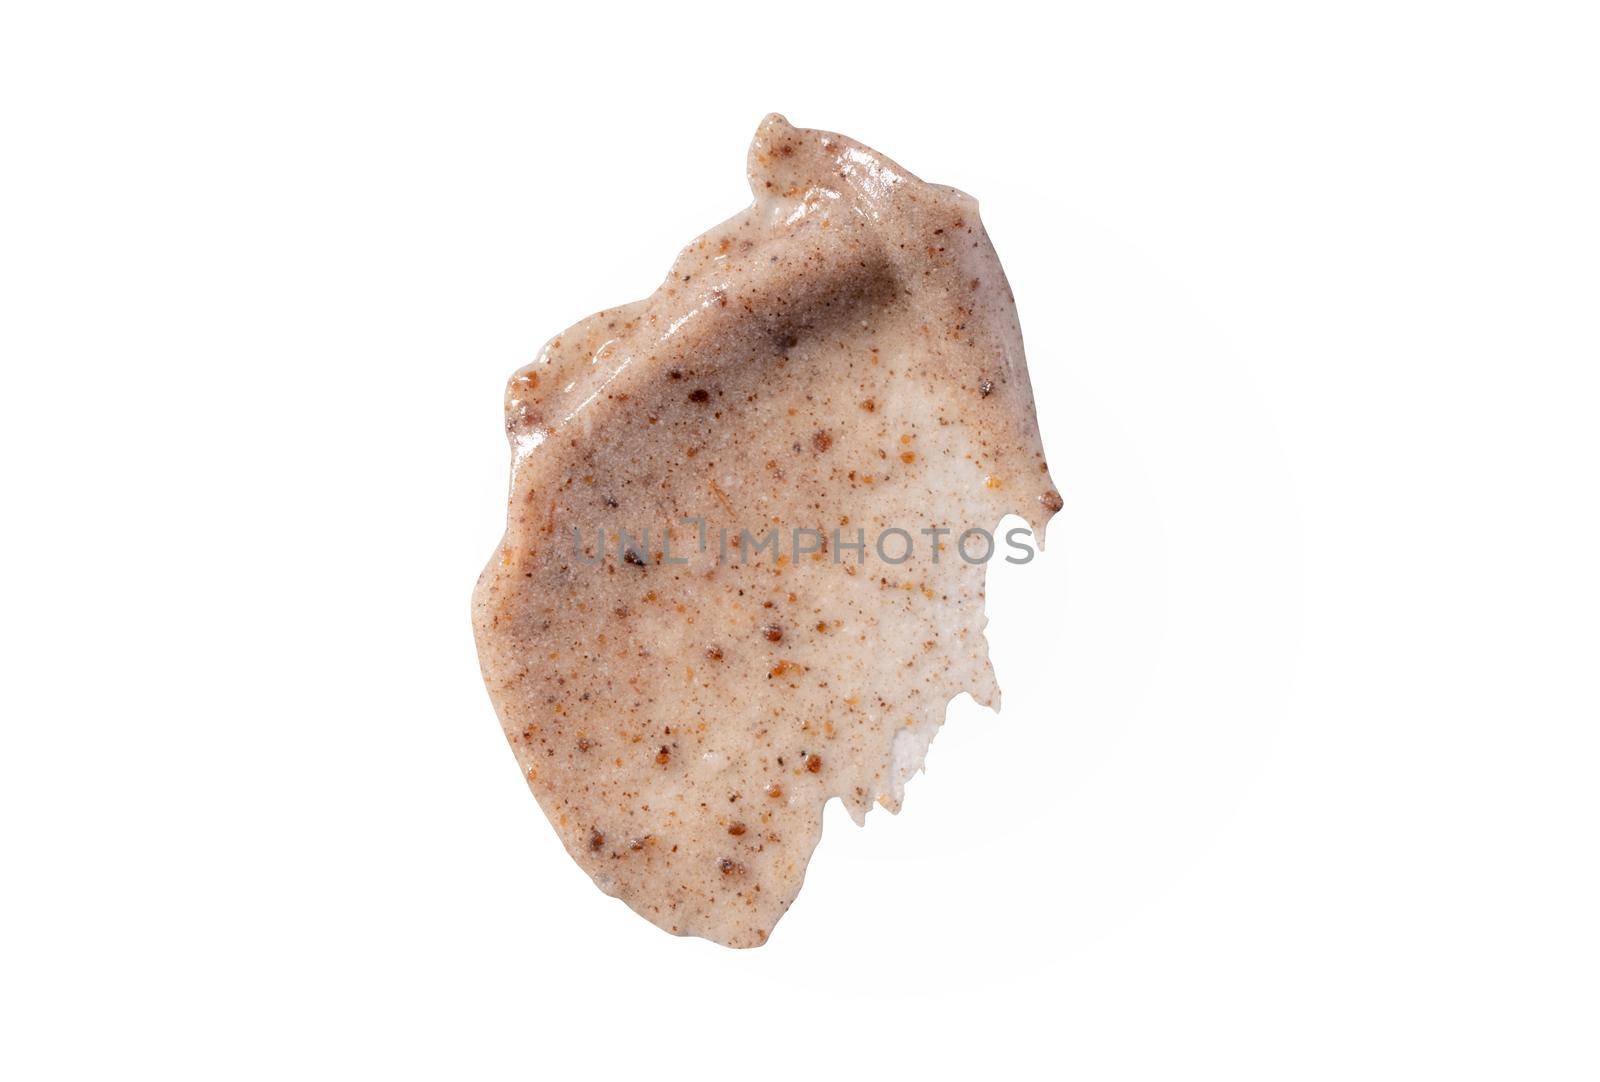 Scrub smear swatch isolated on white background. Peeling cream smudge with exfoliating particles, cosmetic skincare product with abrasive particle sample, gentle nude scrub texture isolate